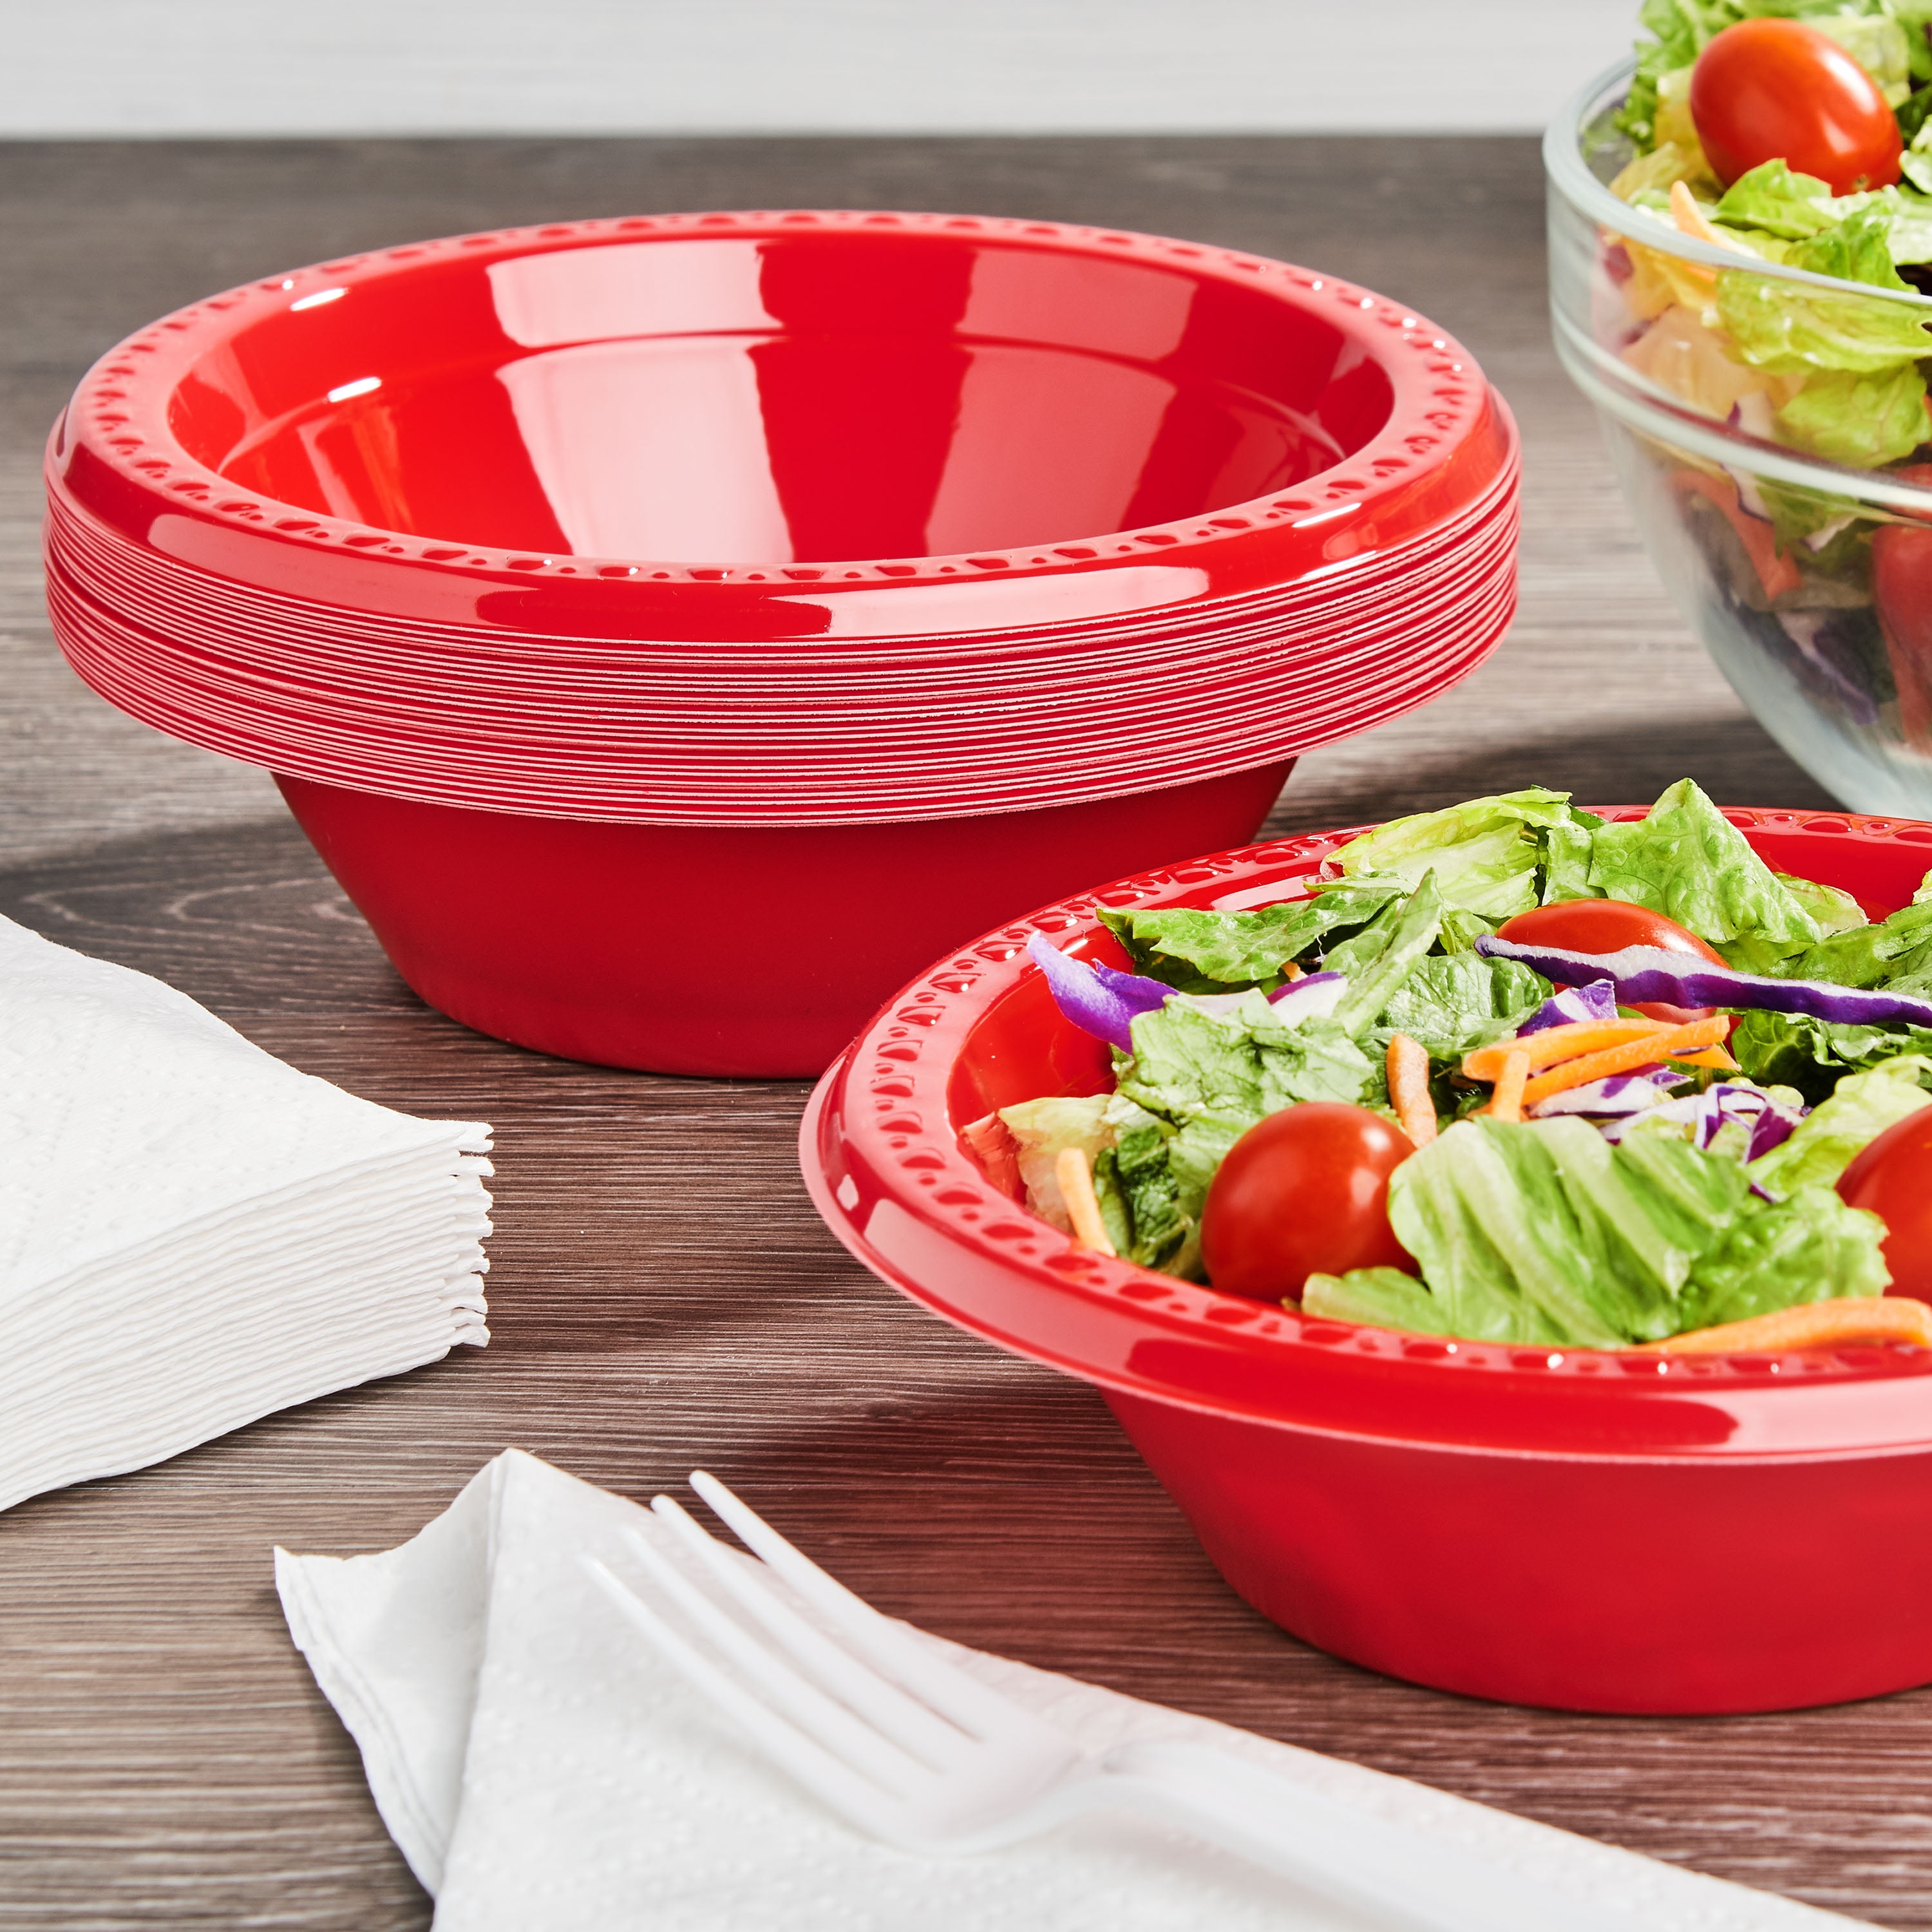 Solo Disposable Plastic Bowls, Red, 20 oz, 22 count ( 2 pack) New